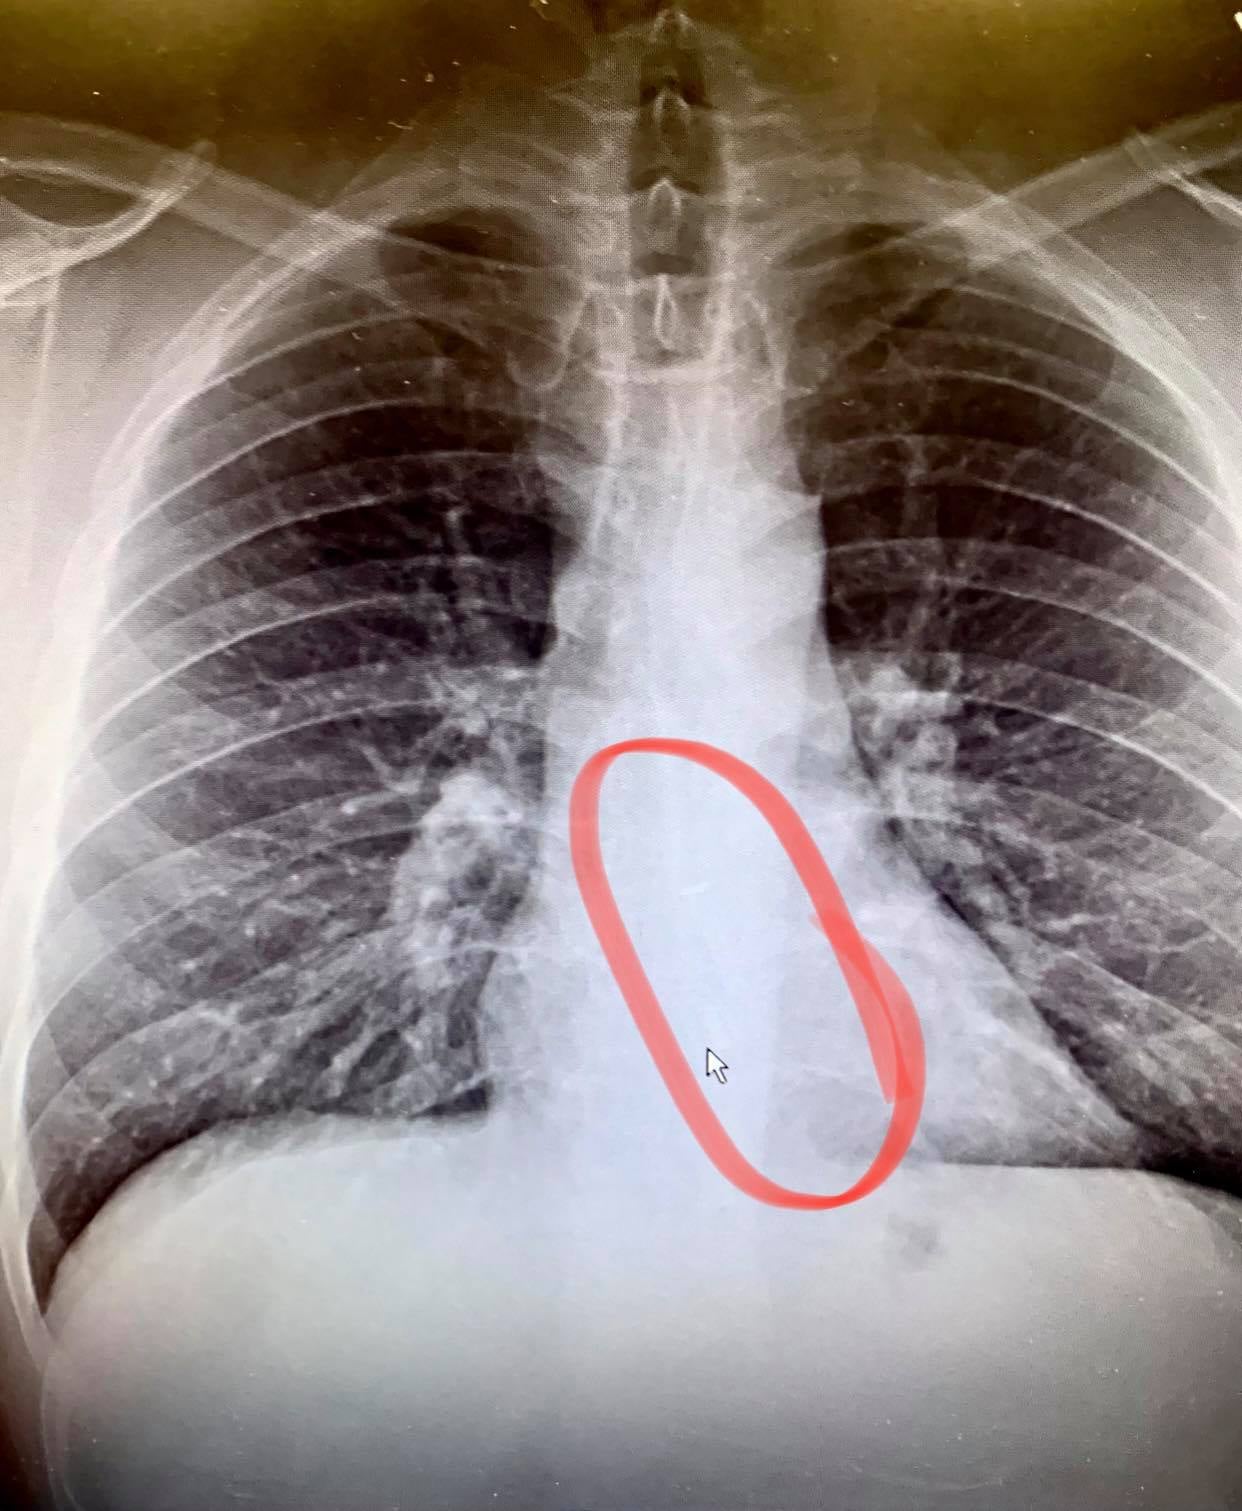 X-rays, pictured from Facebook, showed Brad Gauthier had swallowed an AirPod in his sleep.